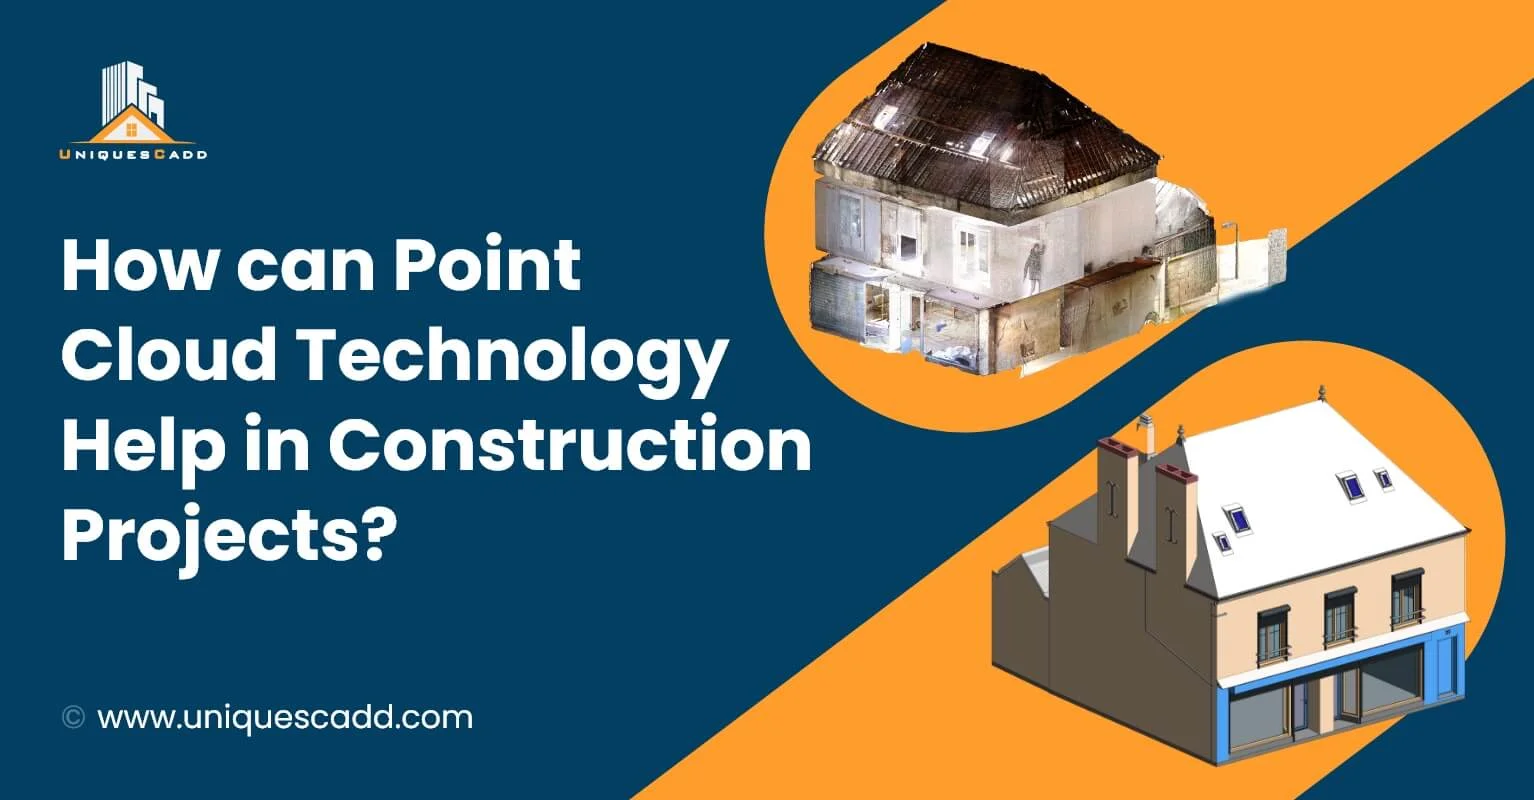 How can Point Cloud Technology Help in Construction Projects